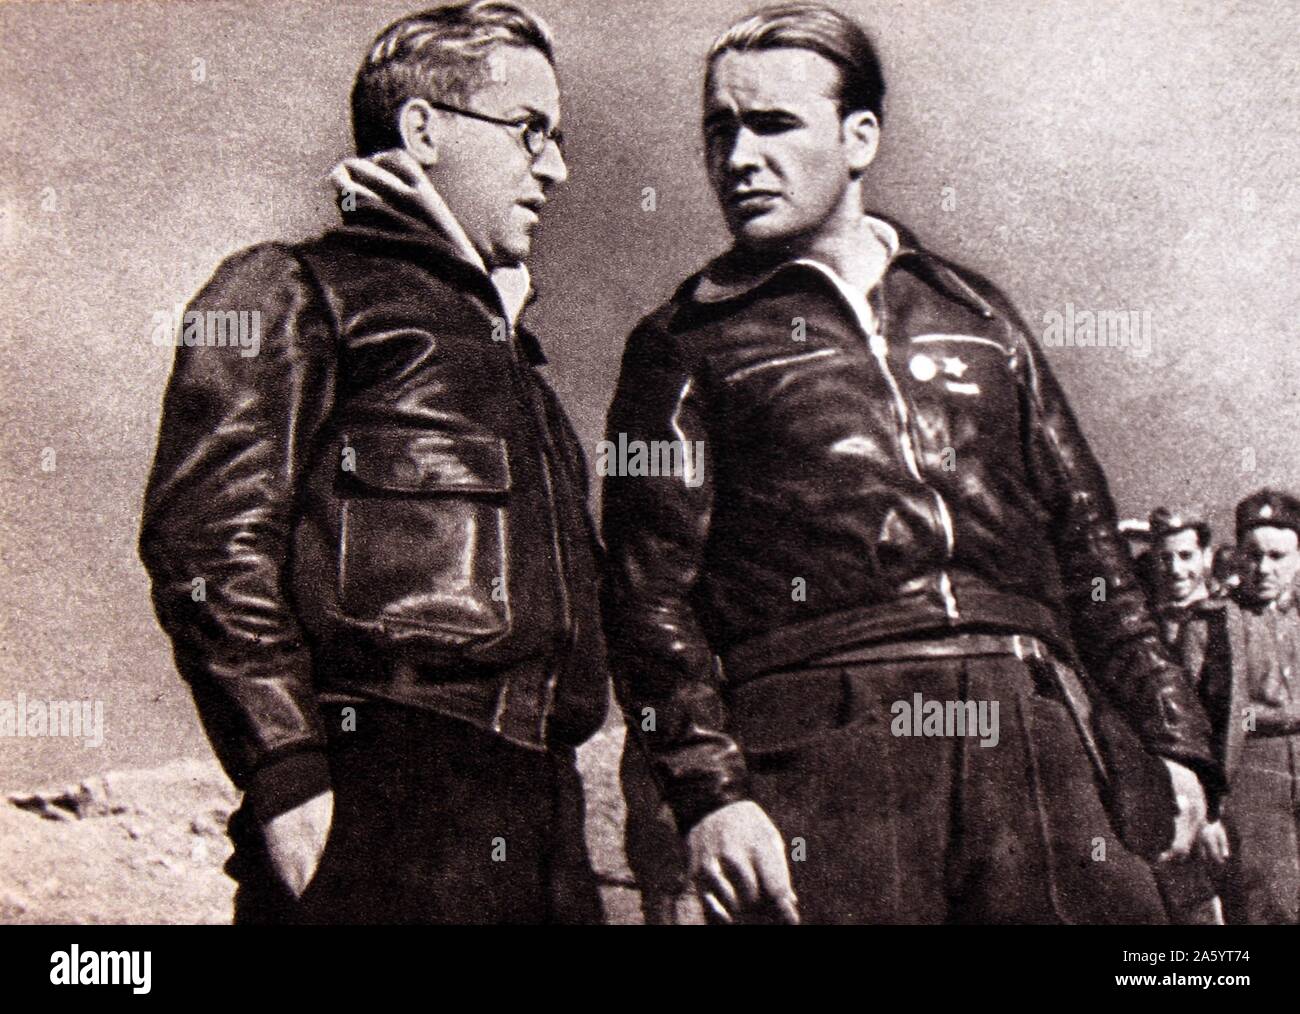 Enrique Líster Forján; seen on right. (1907 – 1994) Spanish communist politician and military officer. during the Spanish Civil War Stock Photo